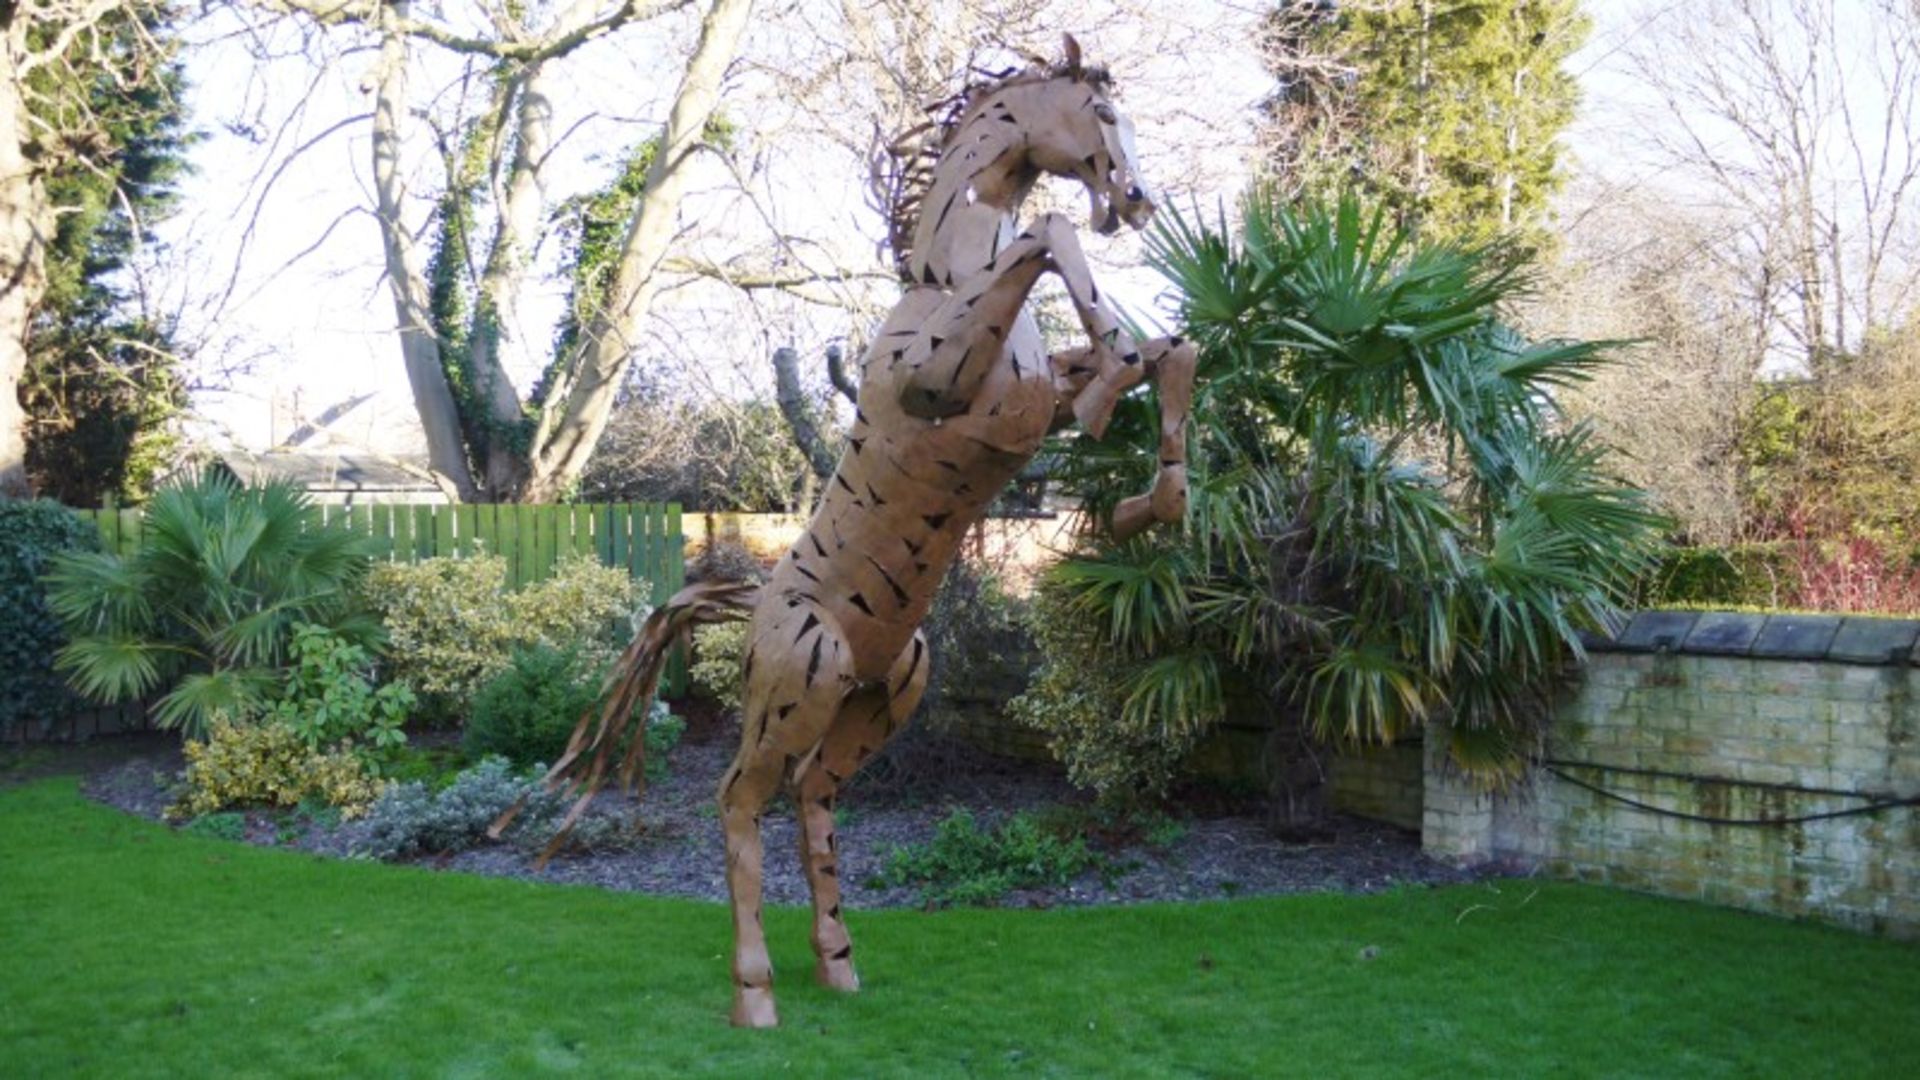 VERY RARE METAL REARING HORSE STATUE - 11 FEET HIGH ! - Image 6 of 6